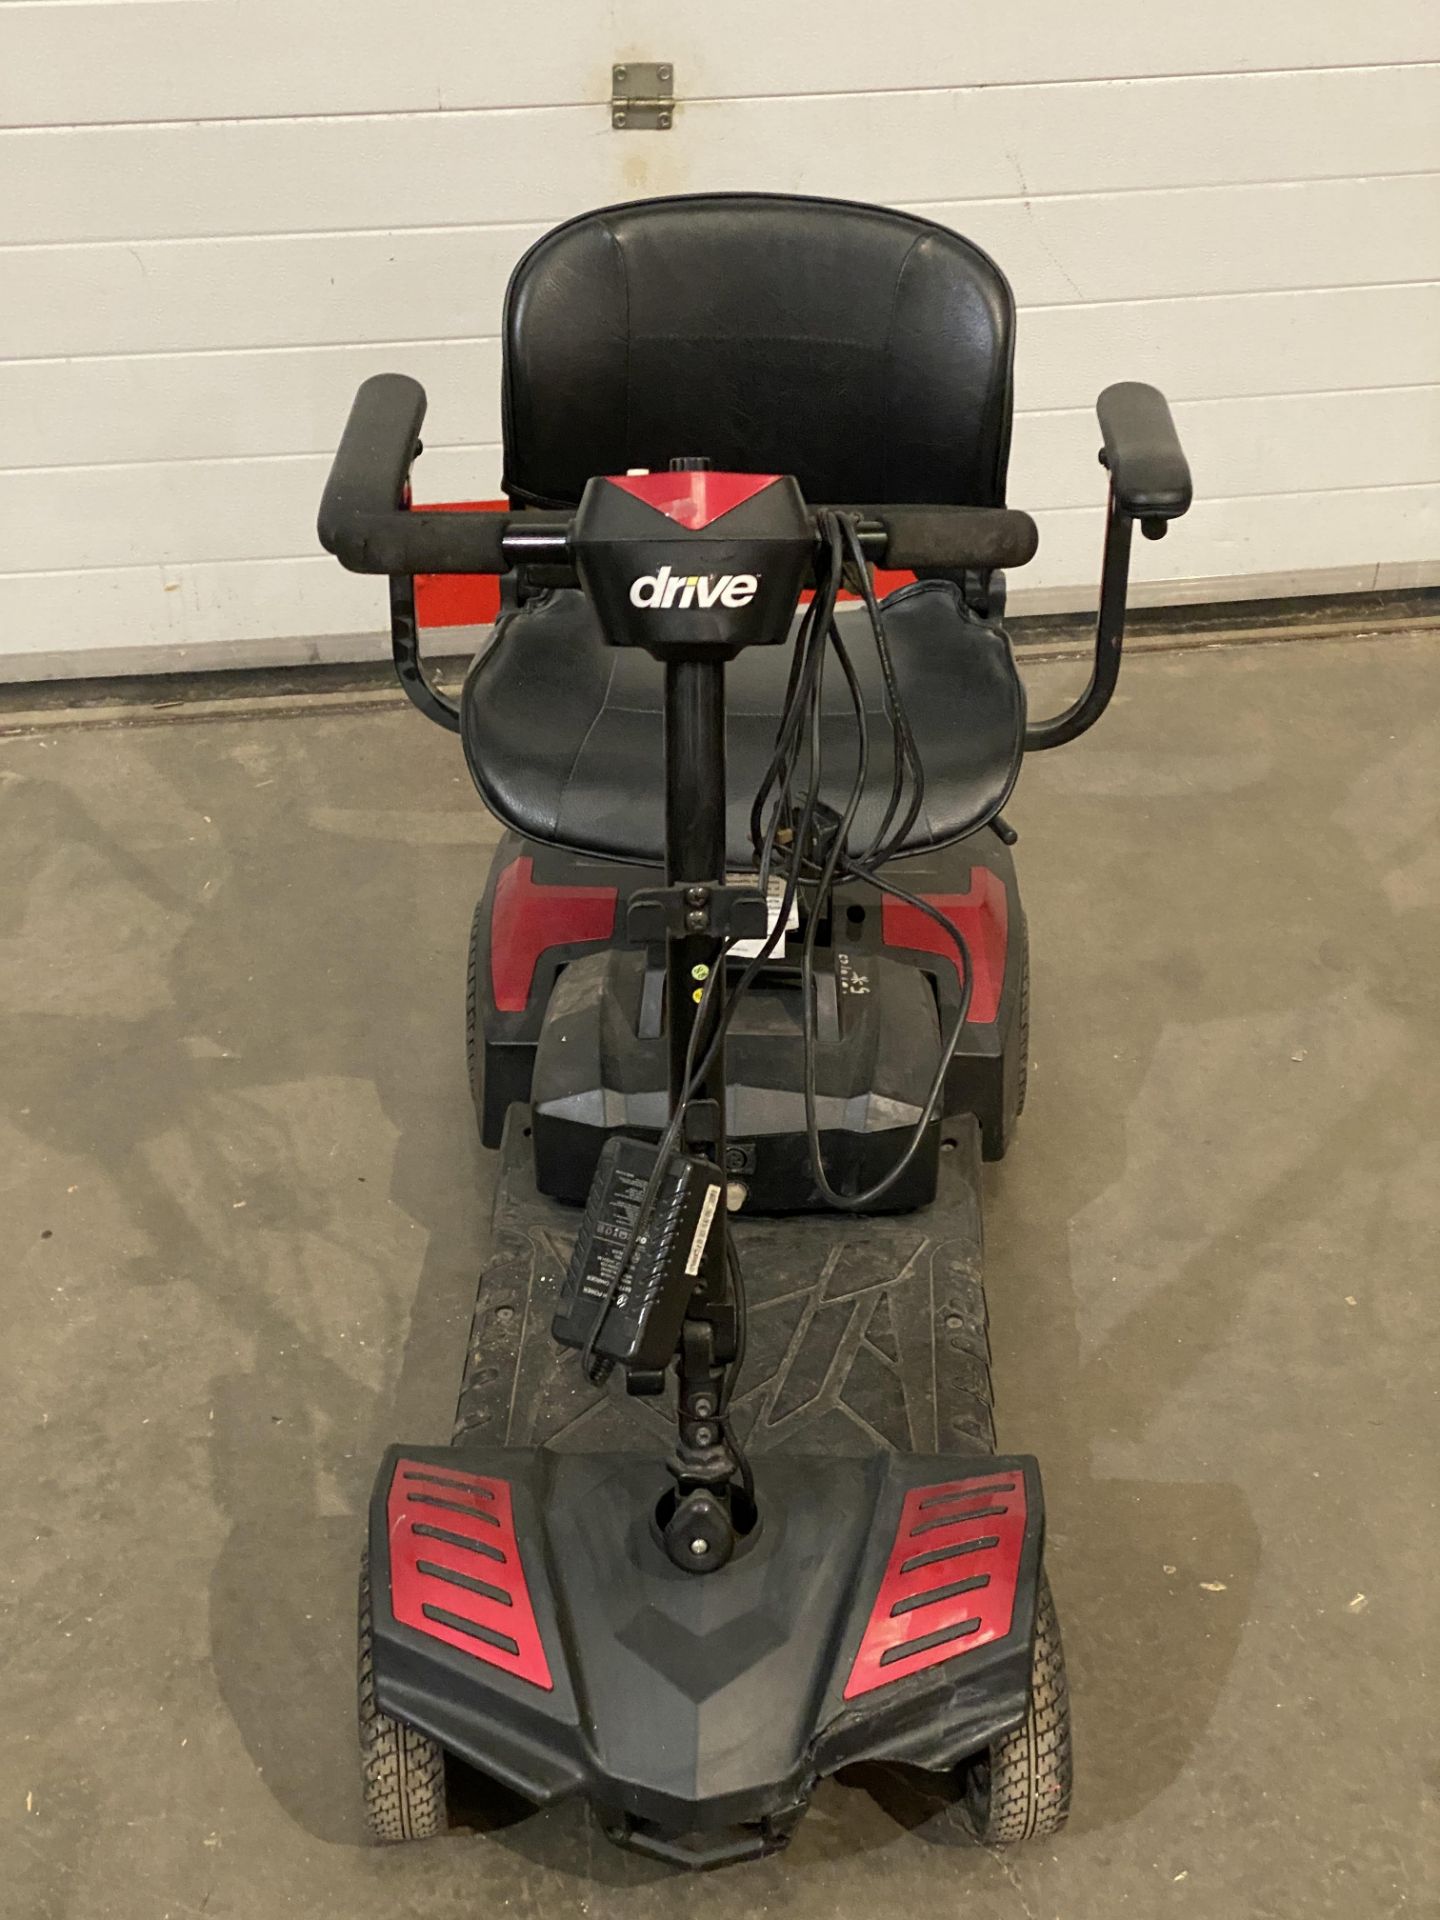 A DRIVE MOBILITY FOUR WHEEL FOLDING MOBILITY SCOOTER complete with charger and key - runs (Saleroom - Bild 2 aus 4